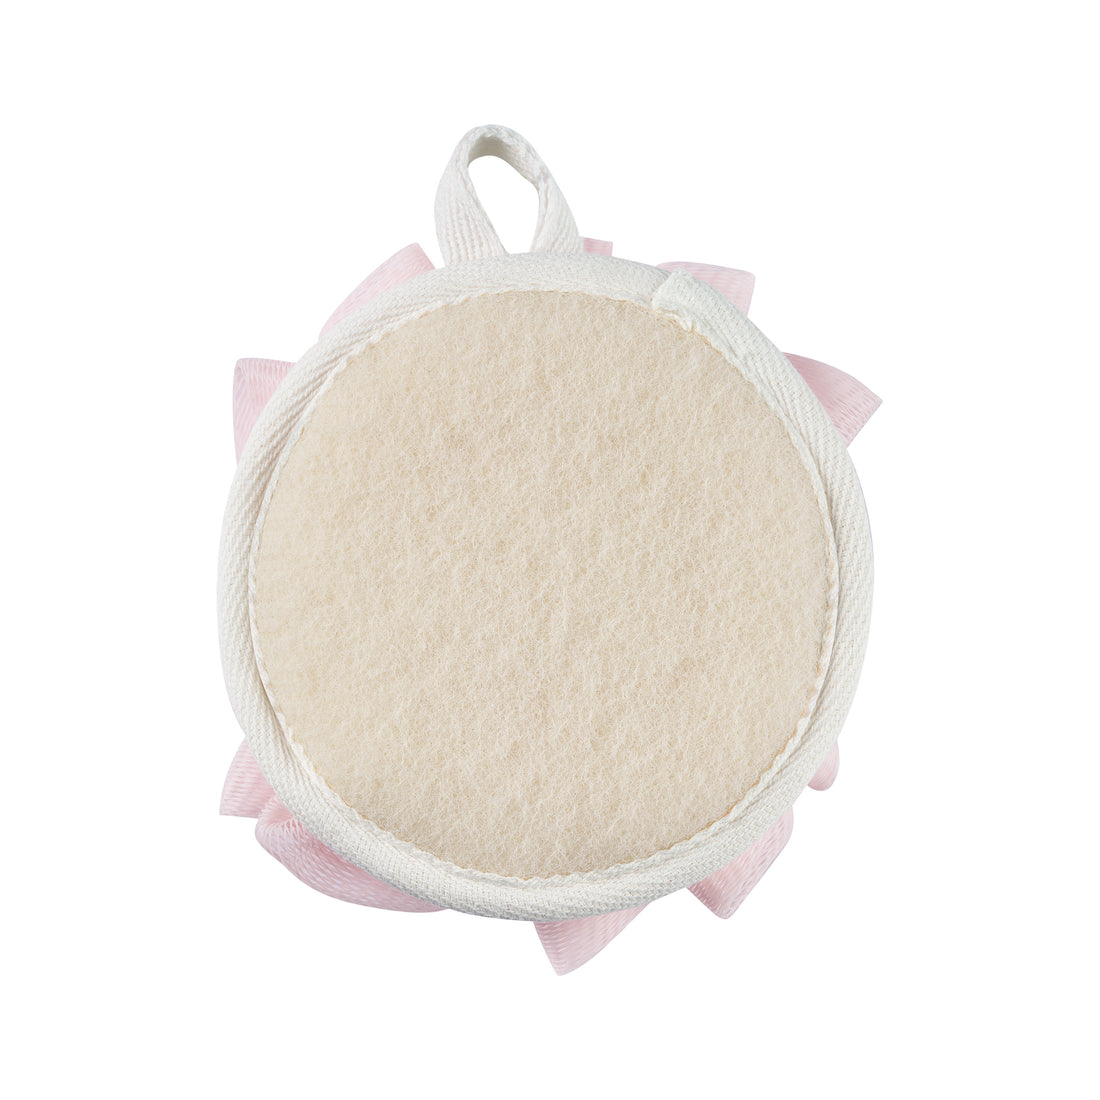 EcoTools - EcoPouf Dual Cleansing Pad